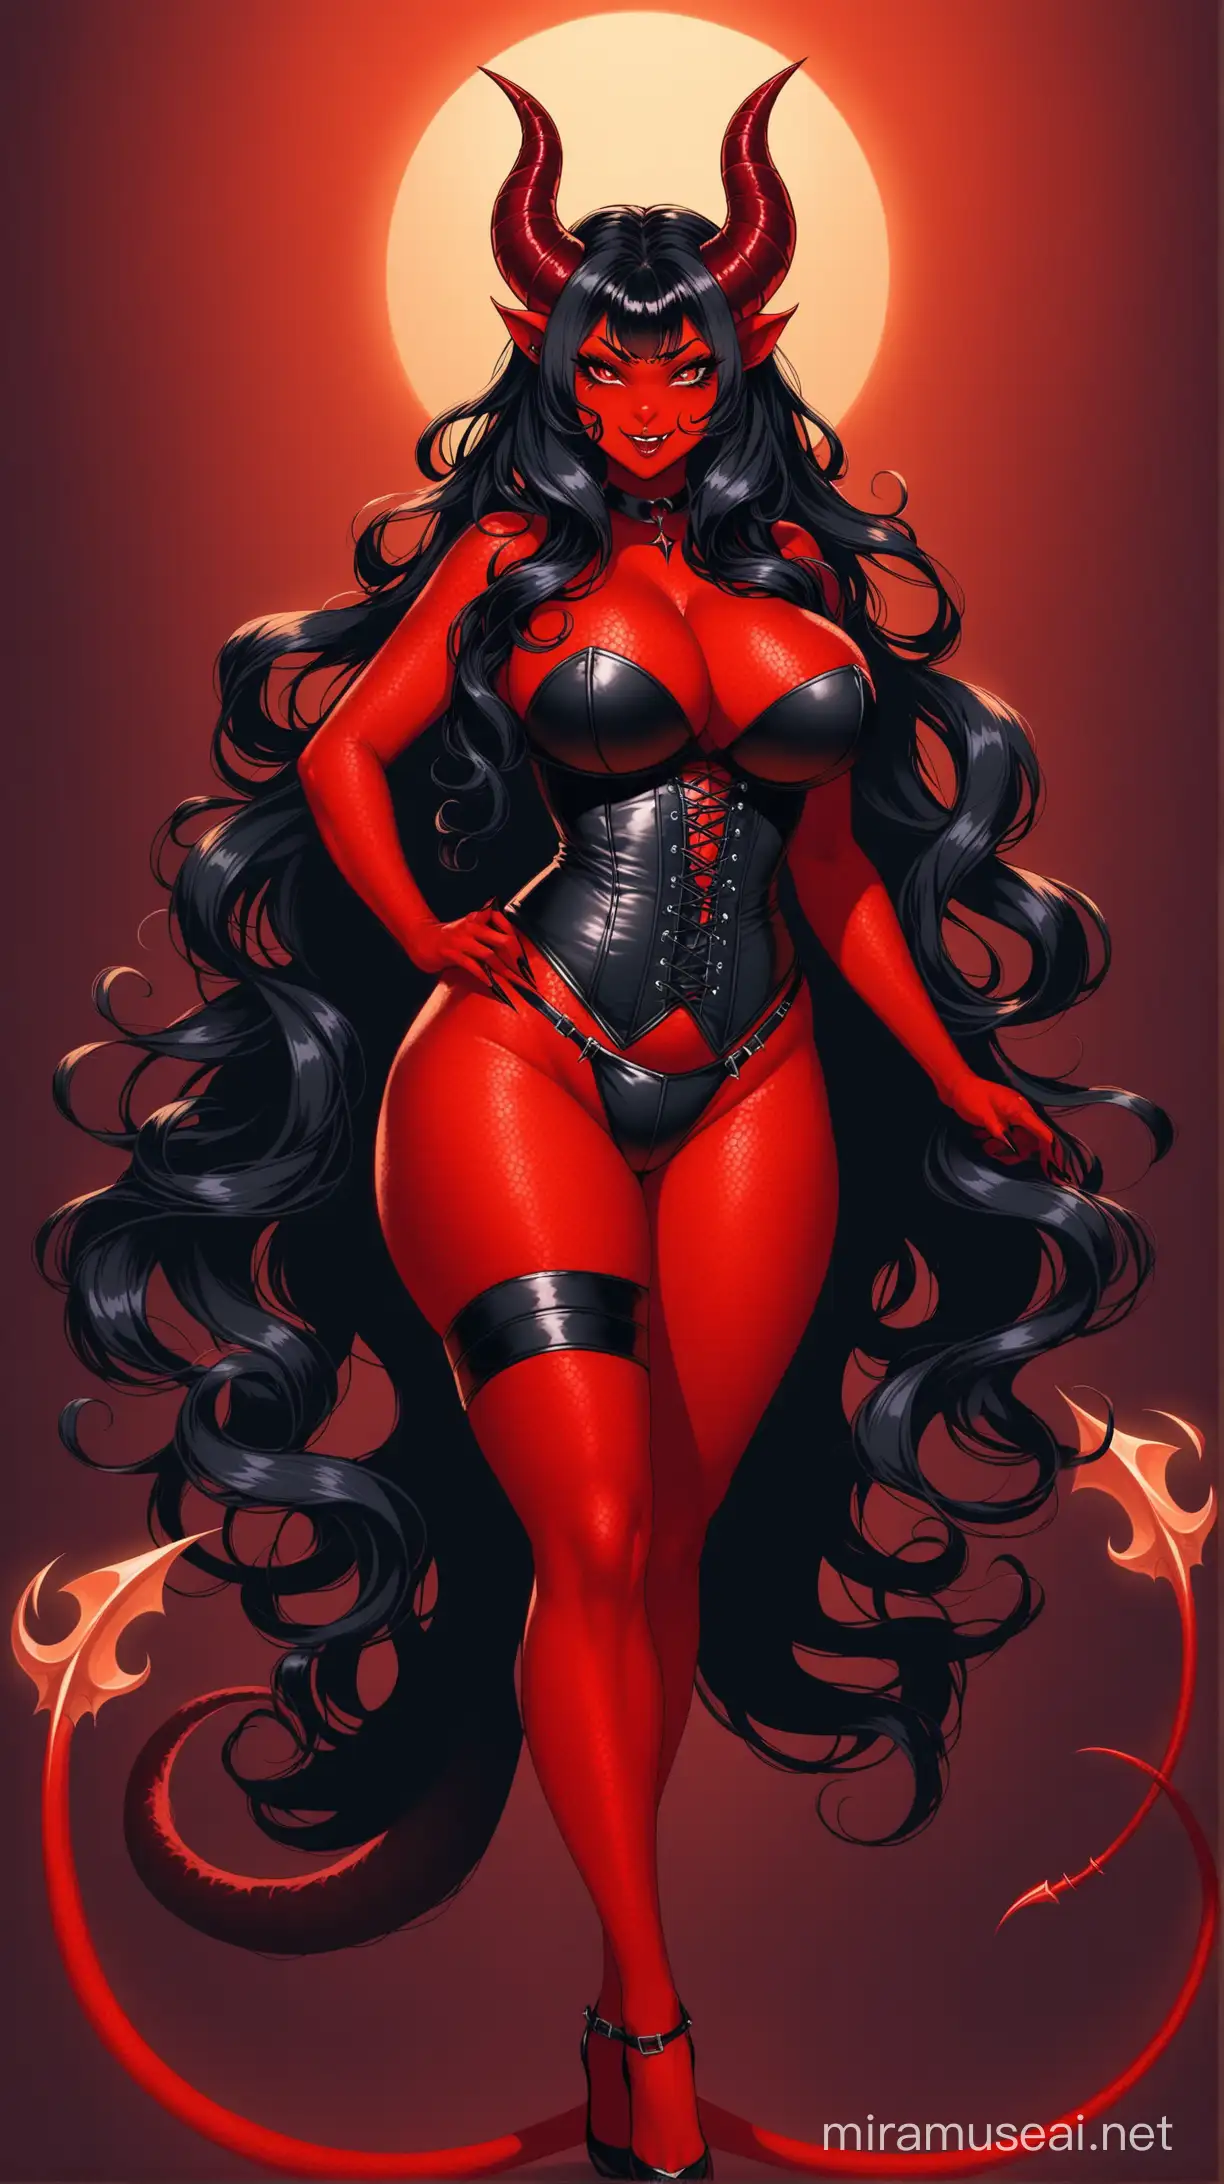 voluptuous red skin female devil with long curly black hair wearing horns, tail wearing a leather corset